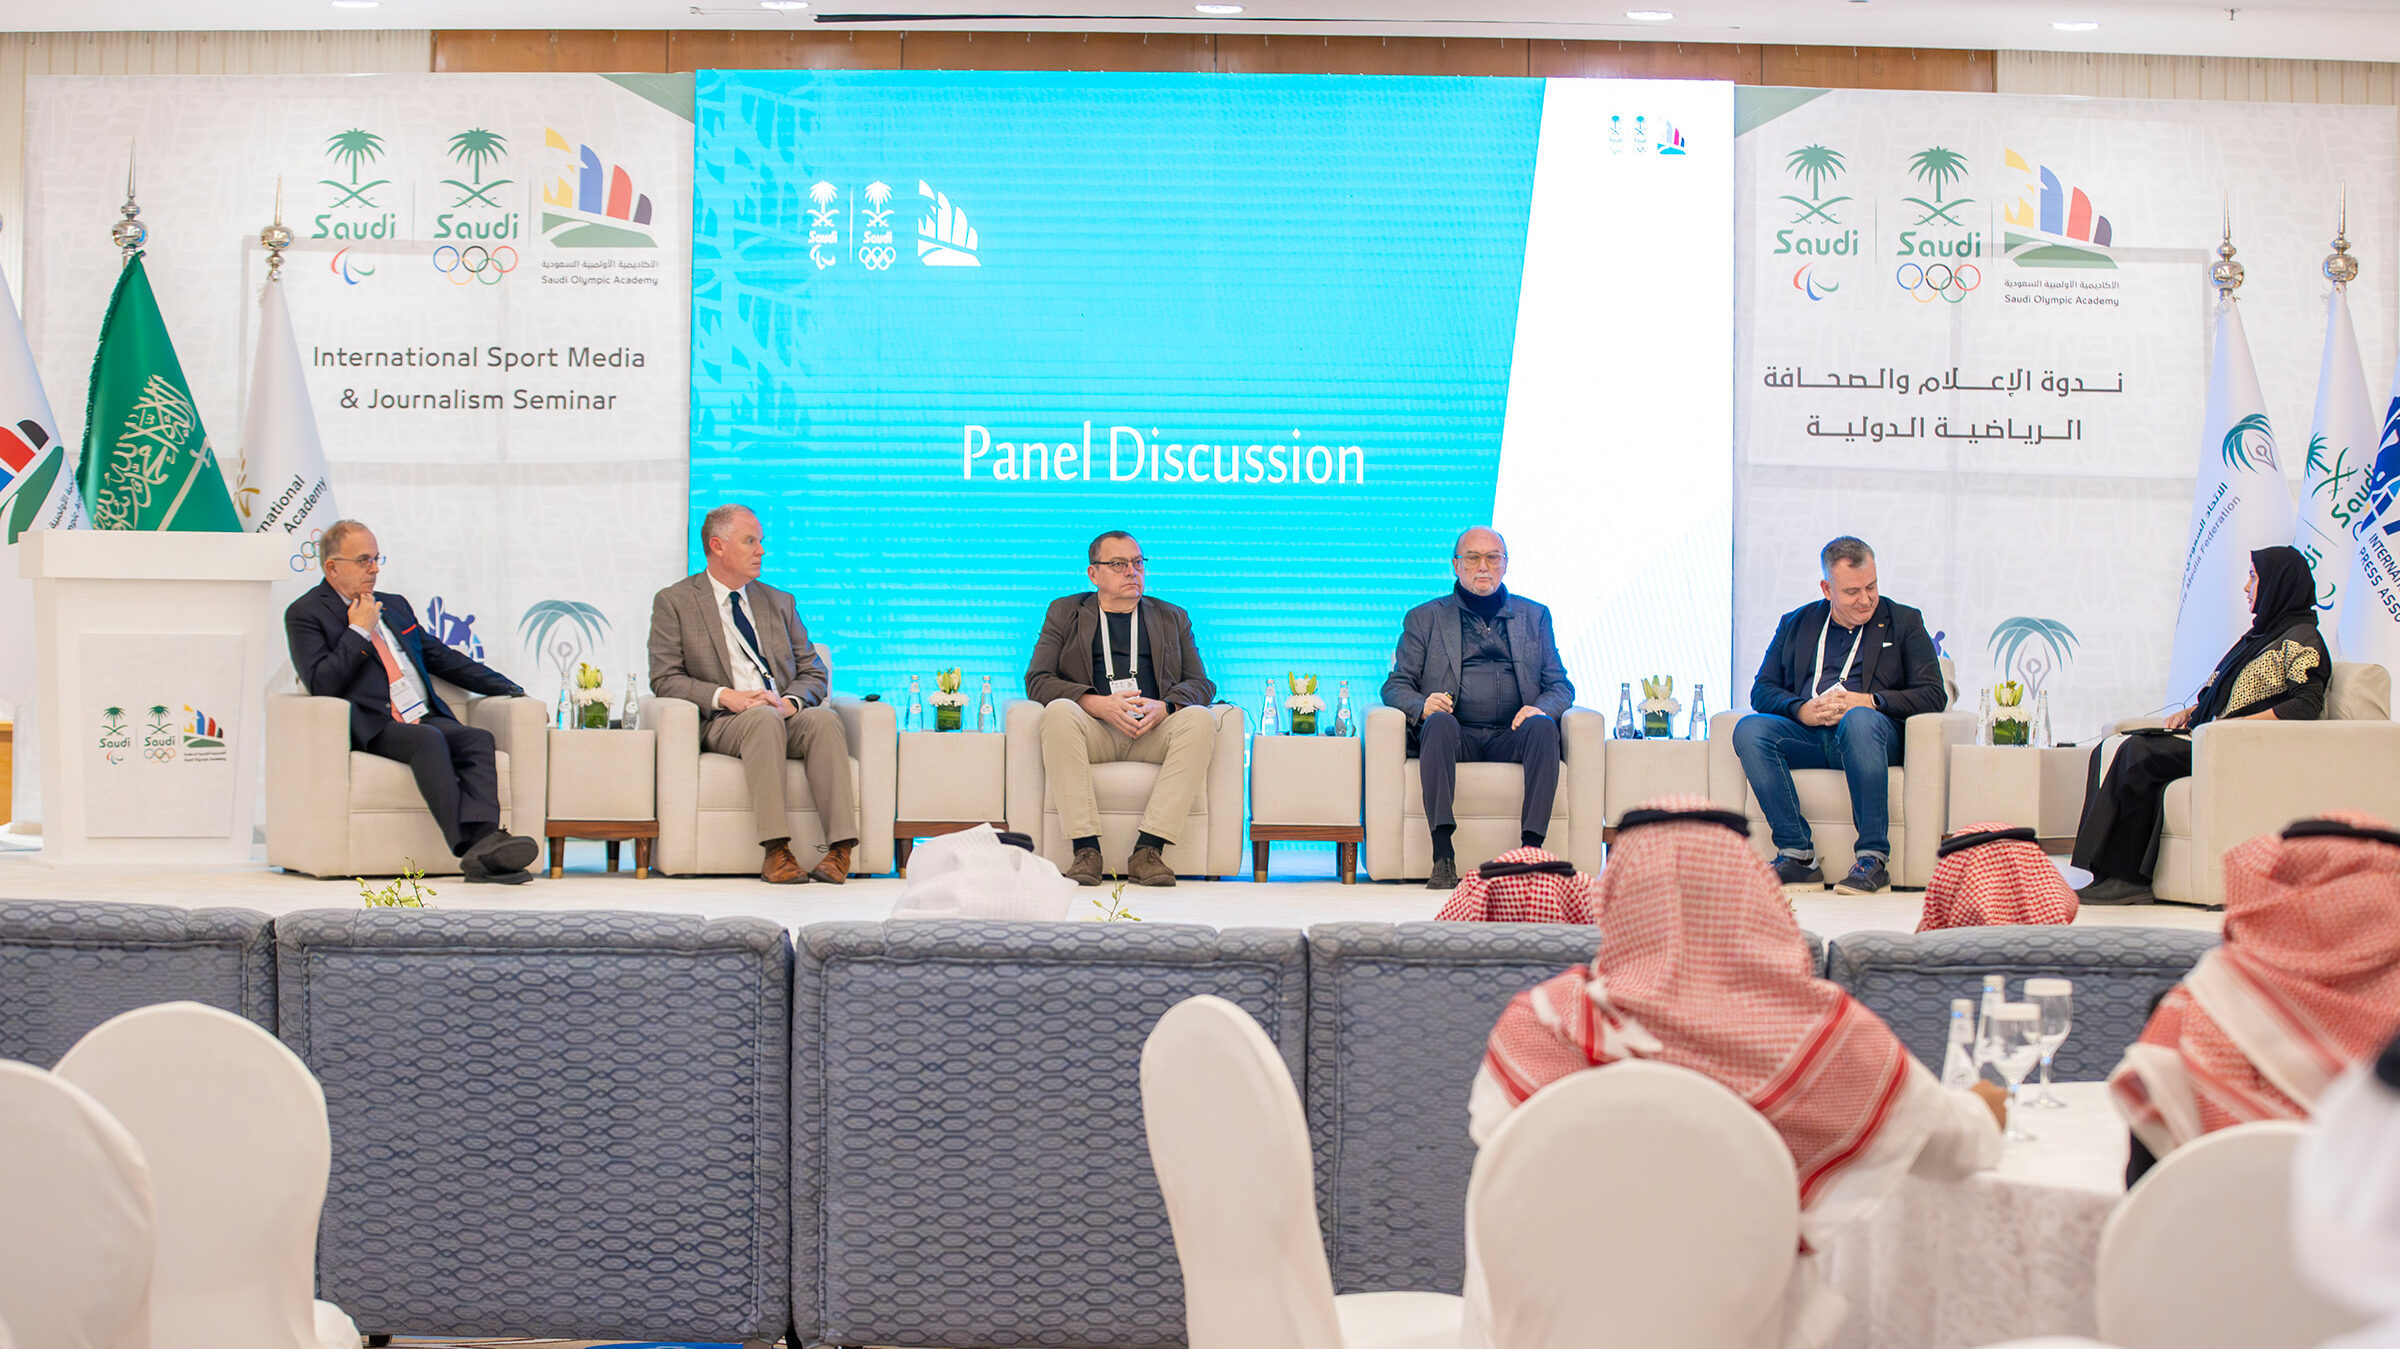 Dr. Andrew Billings sits among a panel of sports experts and researchers at the International Sport Media and Journalism Seminar in Riyadh, Saudi Arabia.